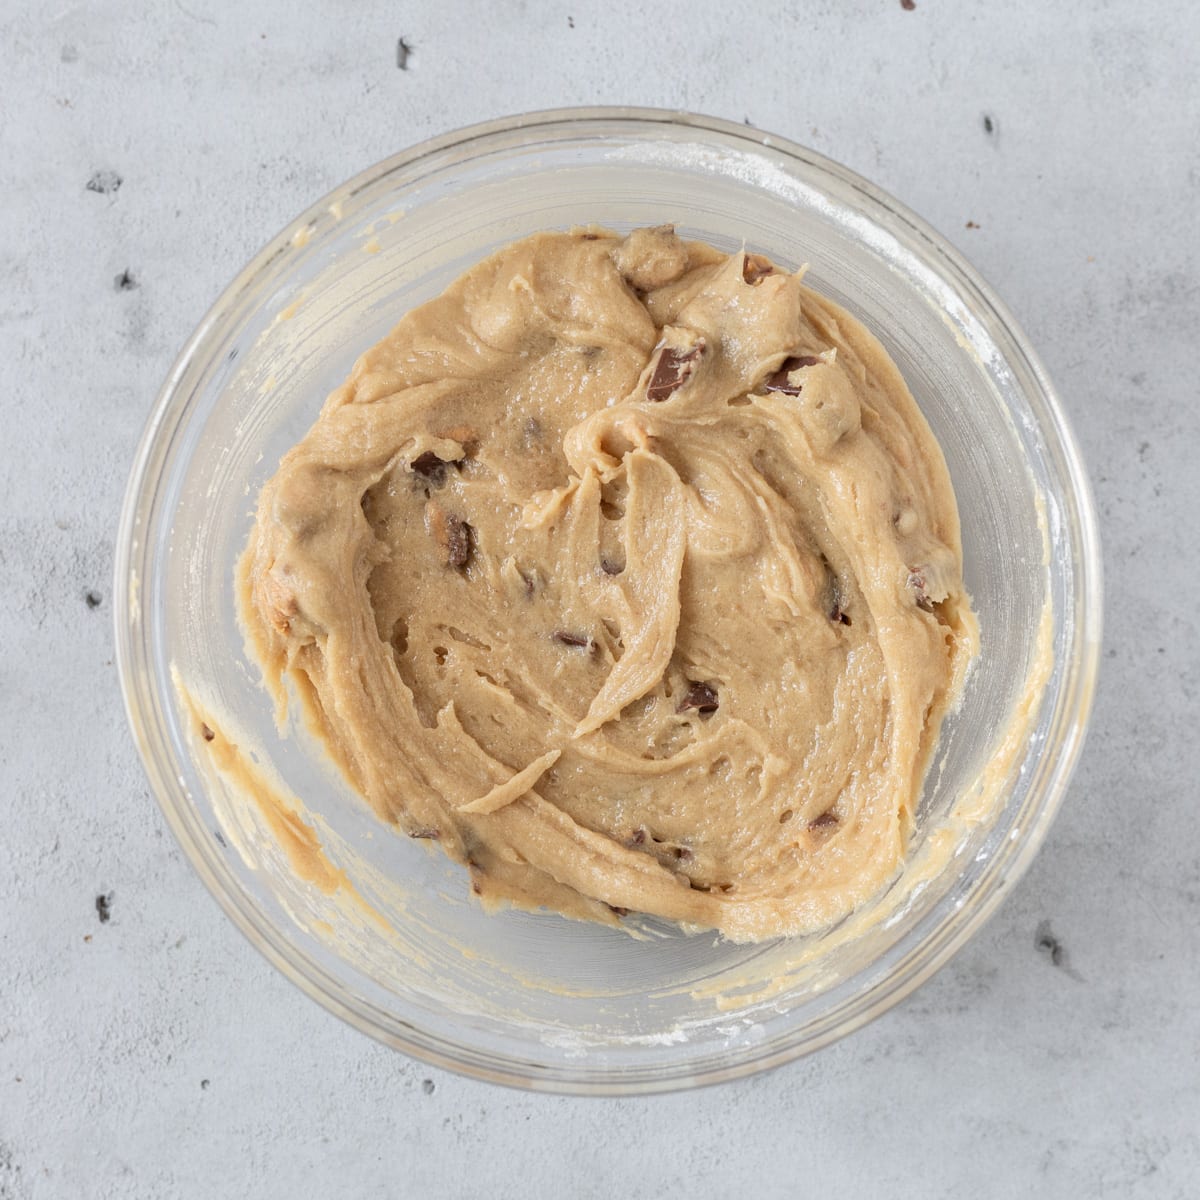 the completed cookie dough in a glass bowl on a grey background.